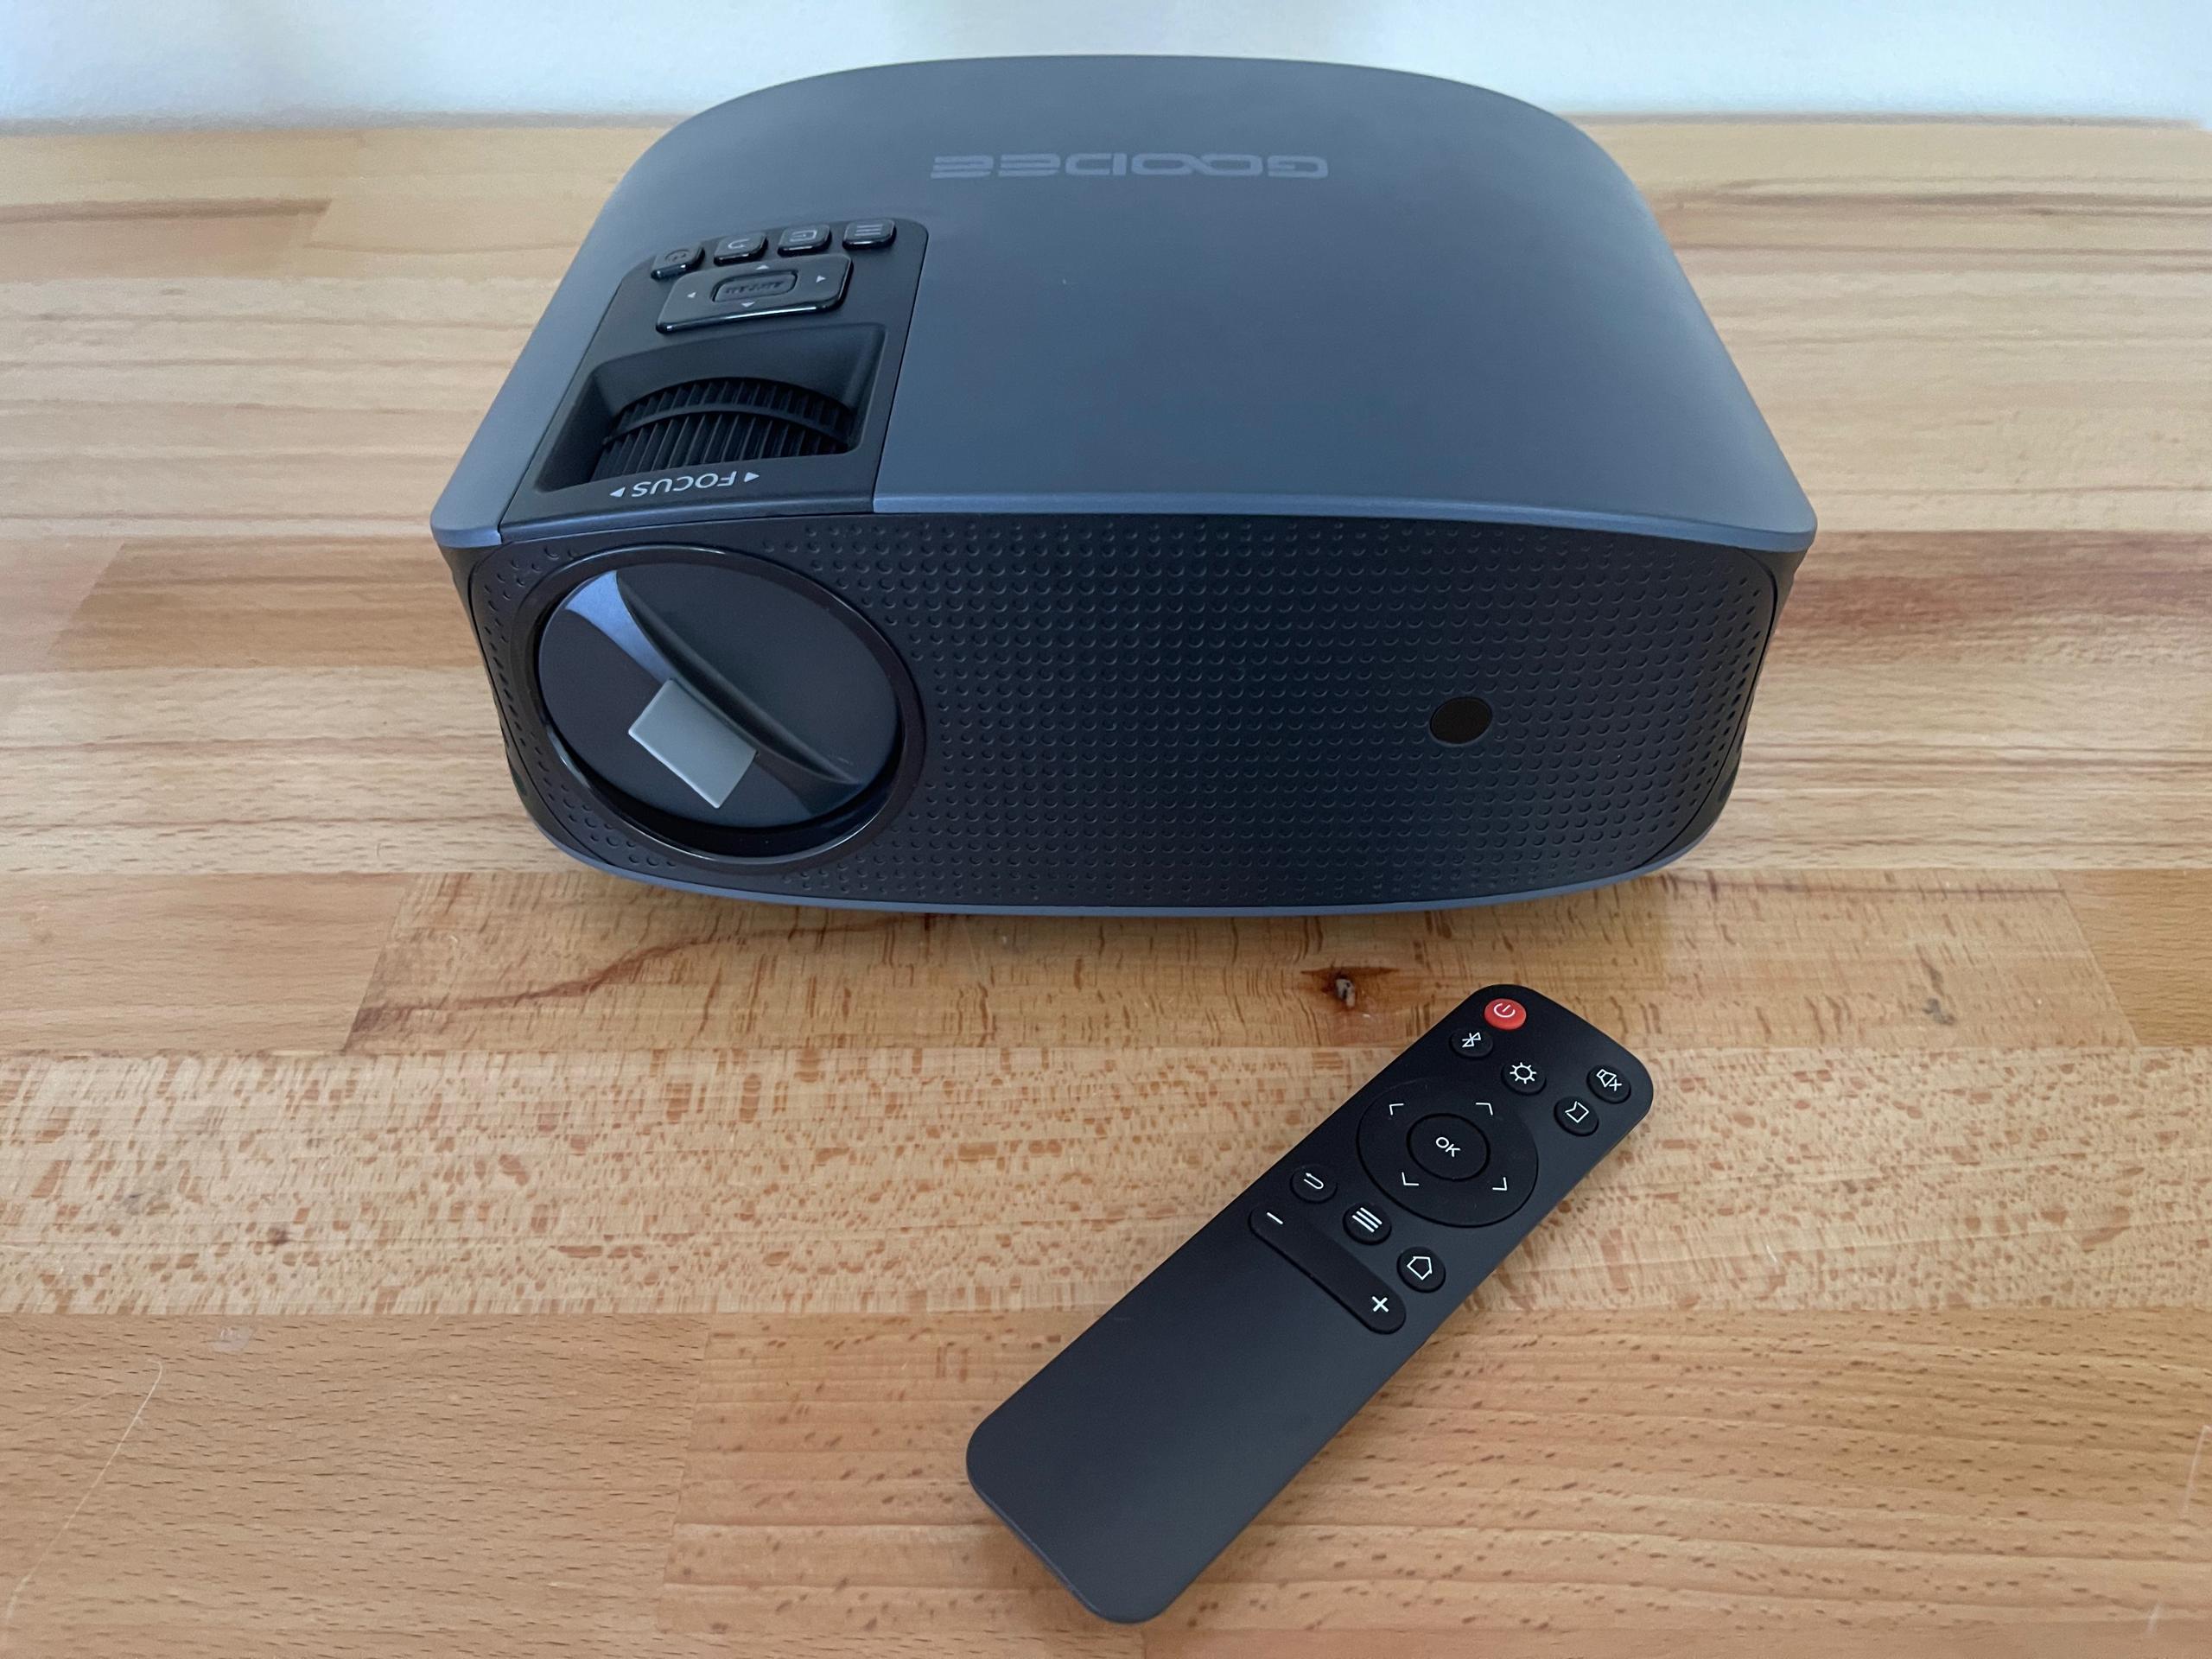 GooDee Y600 Plus Video Projector and a remote controller